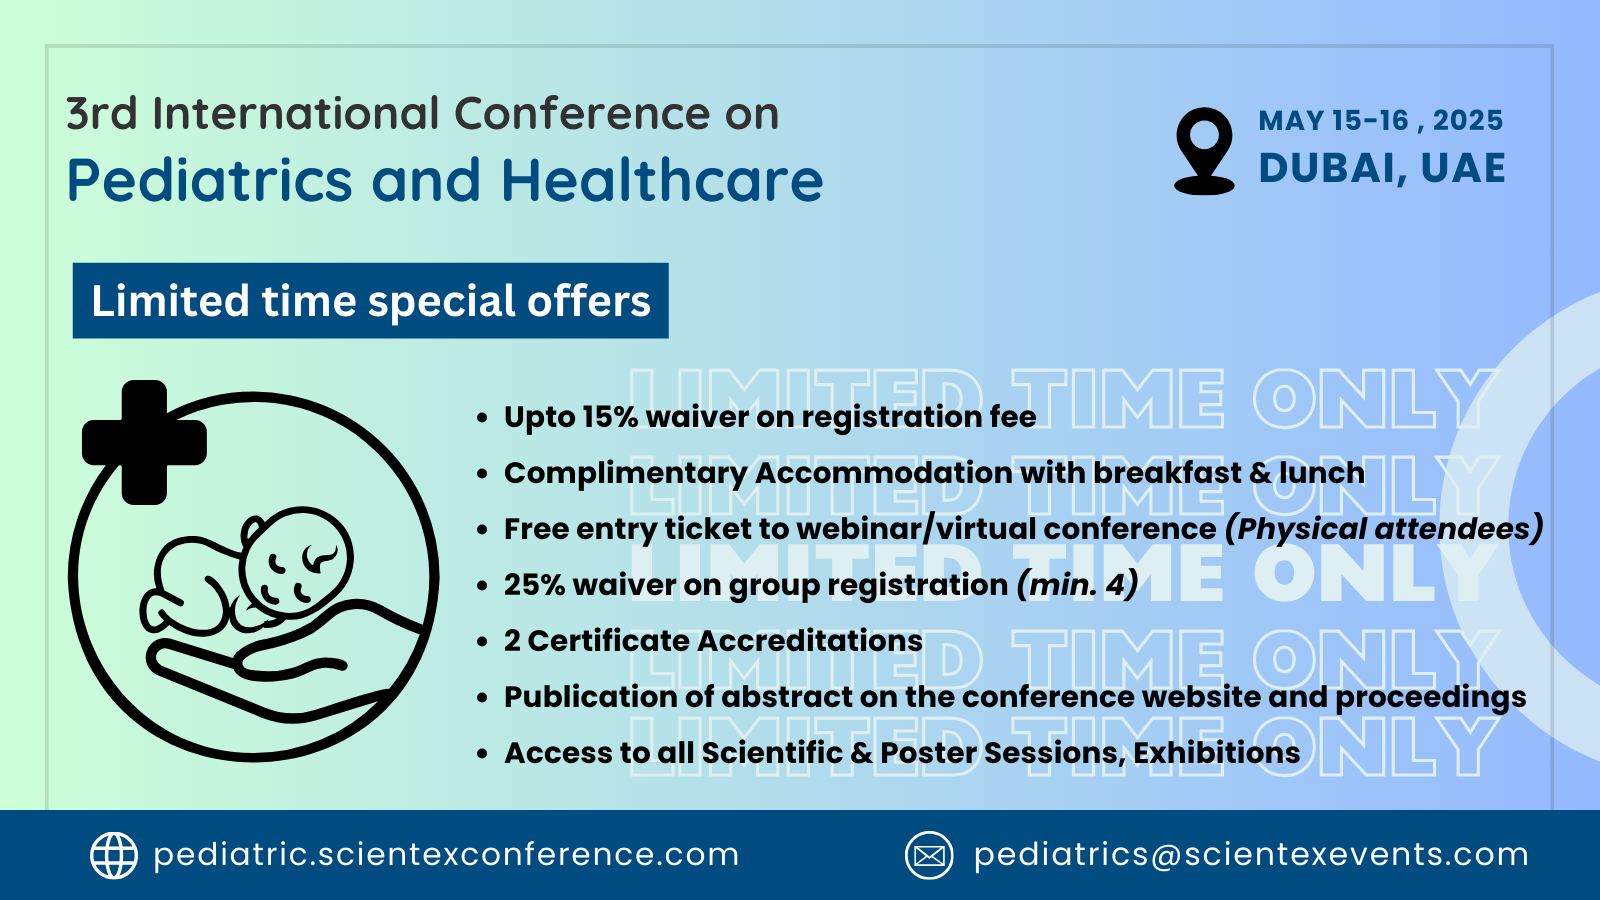 3rd International Conference on Pediatrics and Healthcare 2025